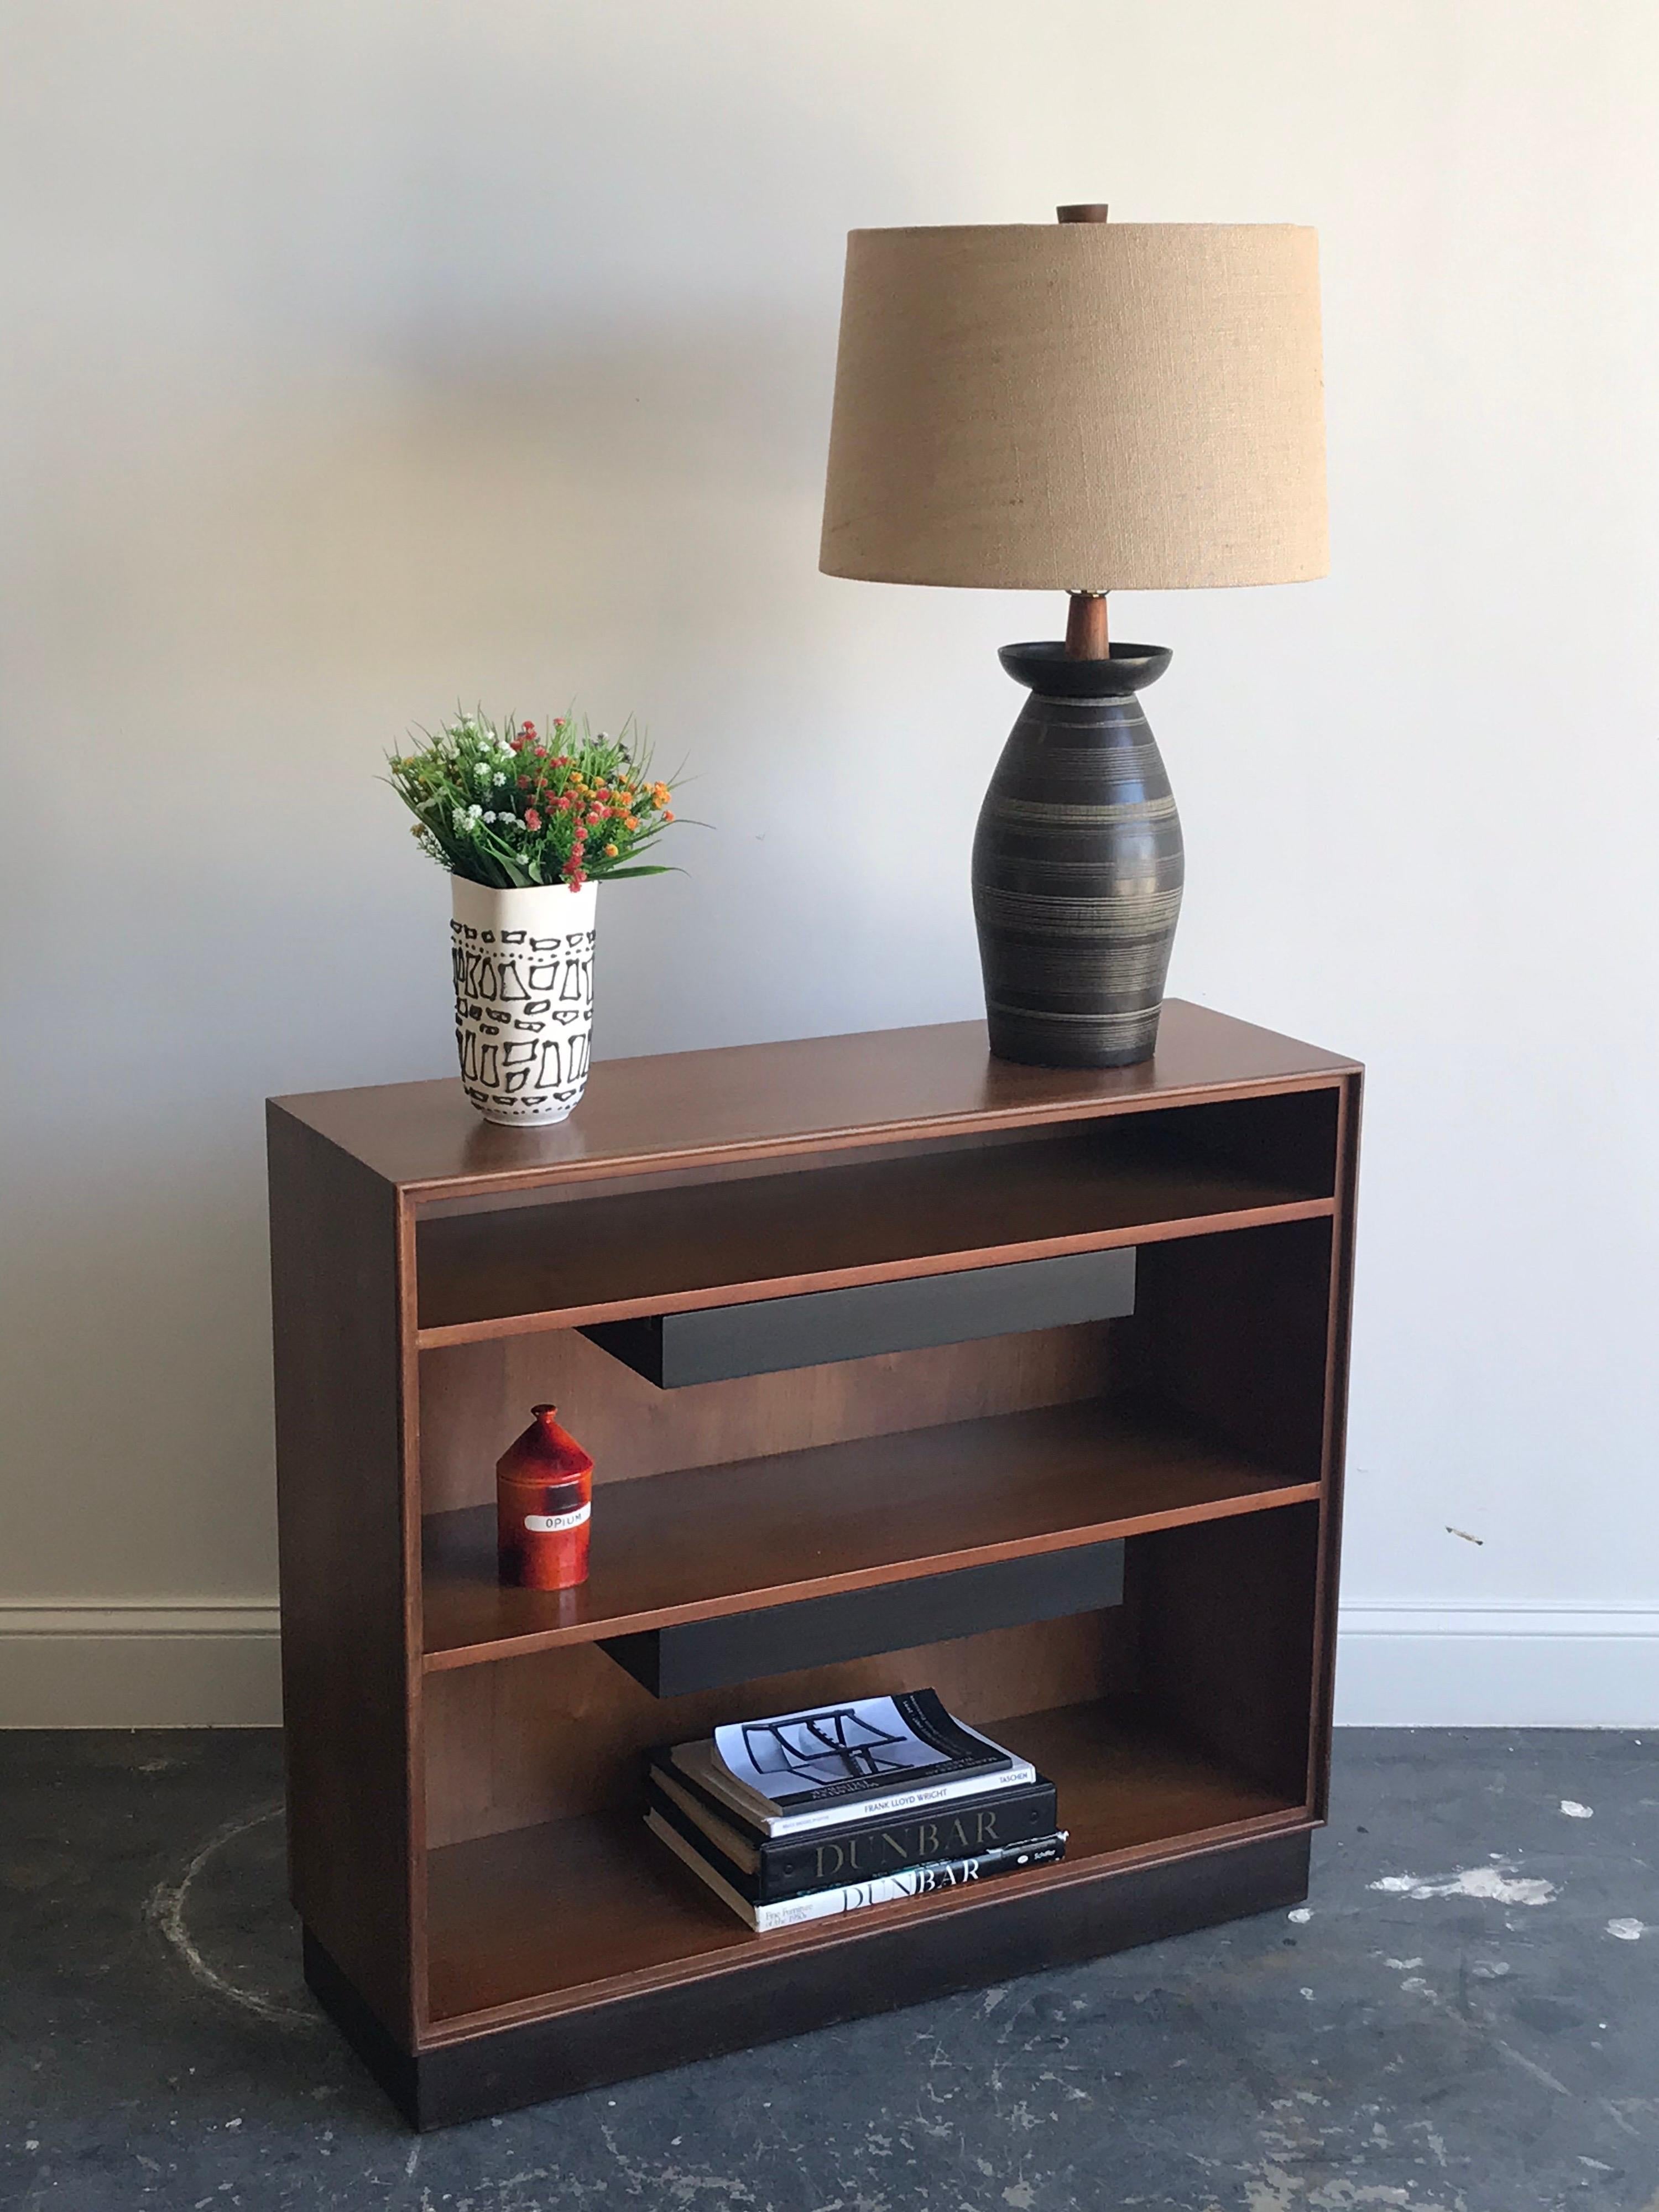 An Edward Wormley designed bookcase for Dunbar. Both shelves have a floating drawer that hangs from below. Walnut case has been refinished, and interior shelves have been cleaned. Interior has a wonderful glowing patina. Base is wrapped in the